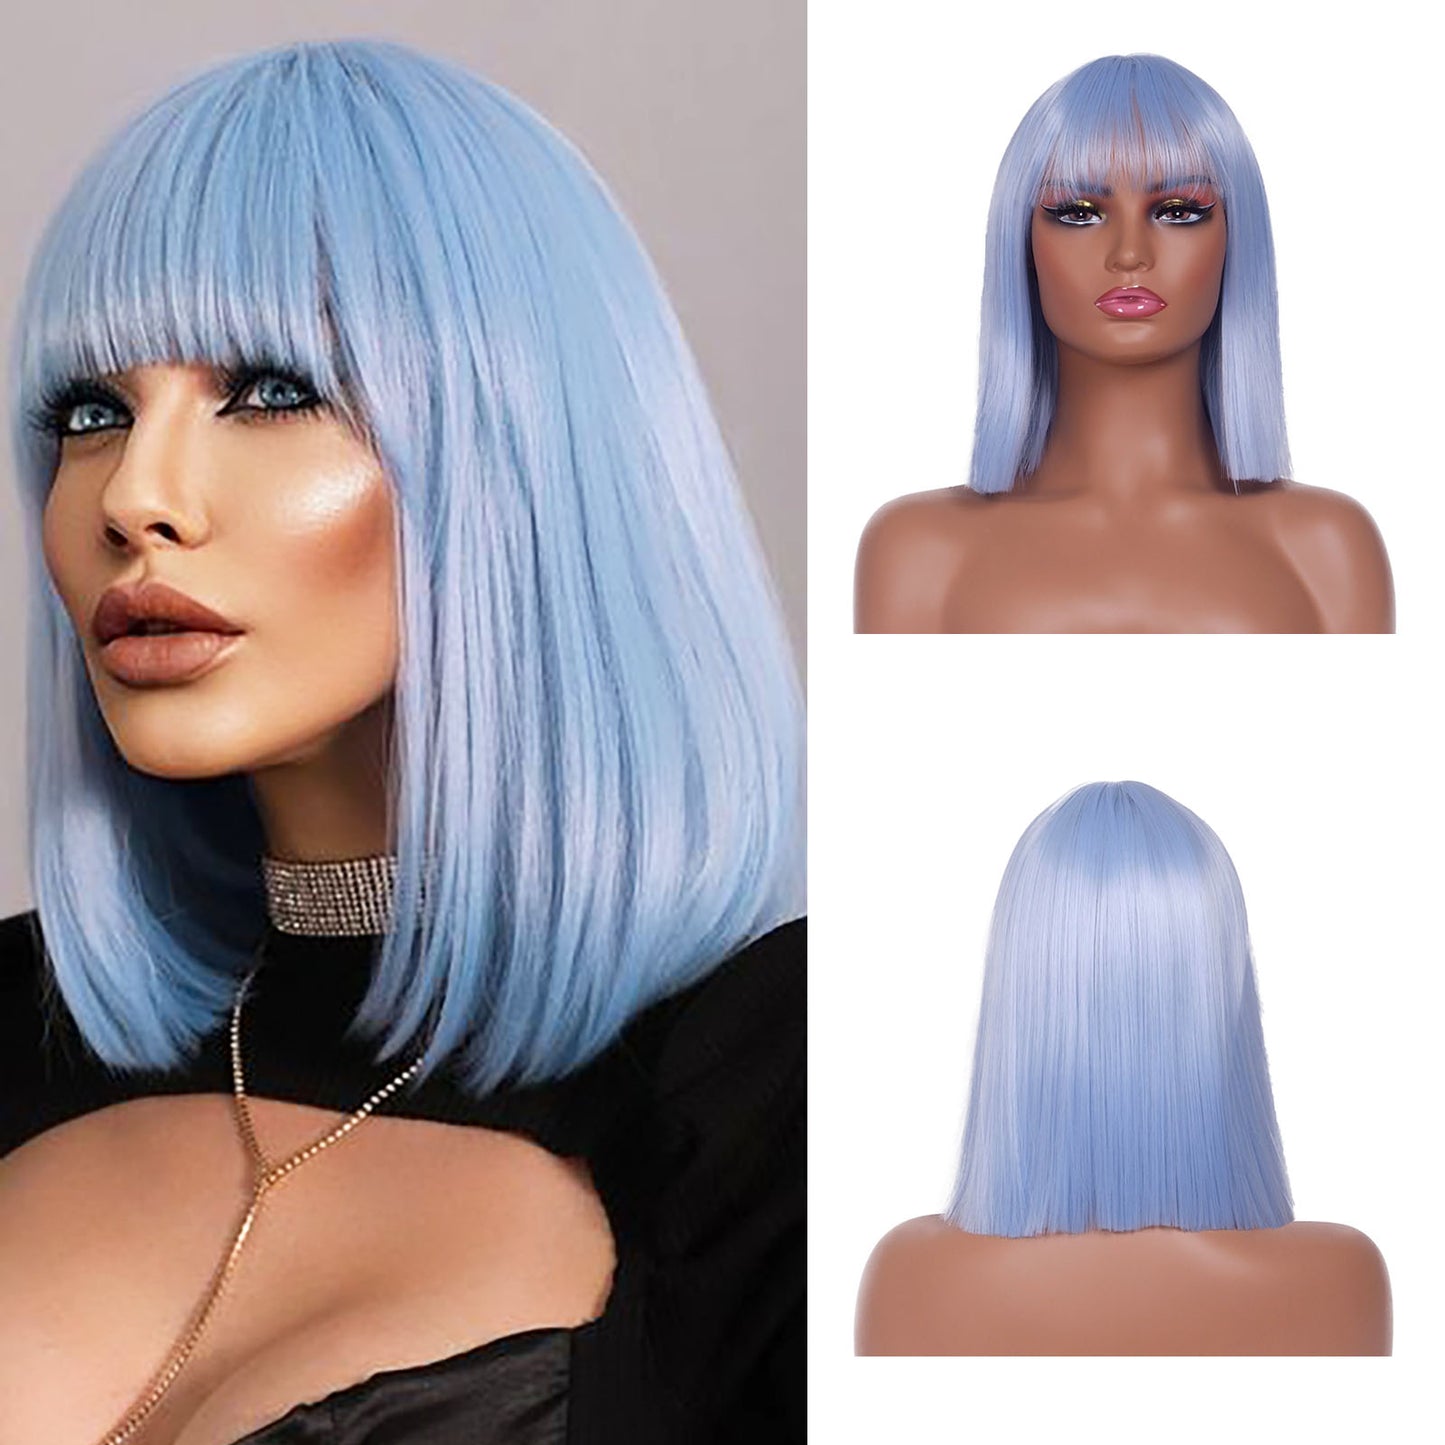 LINGDORA Light Blue Straight Short Wig with Bangs Cosplay